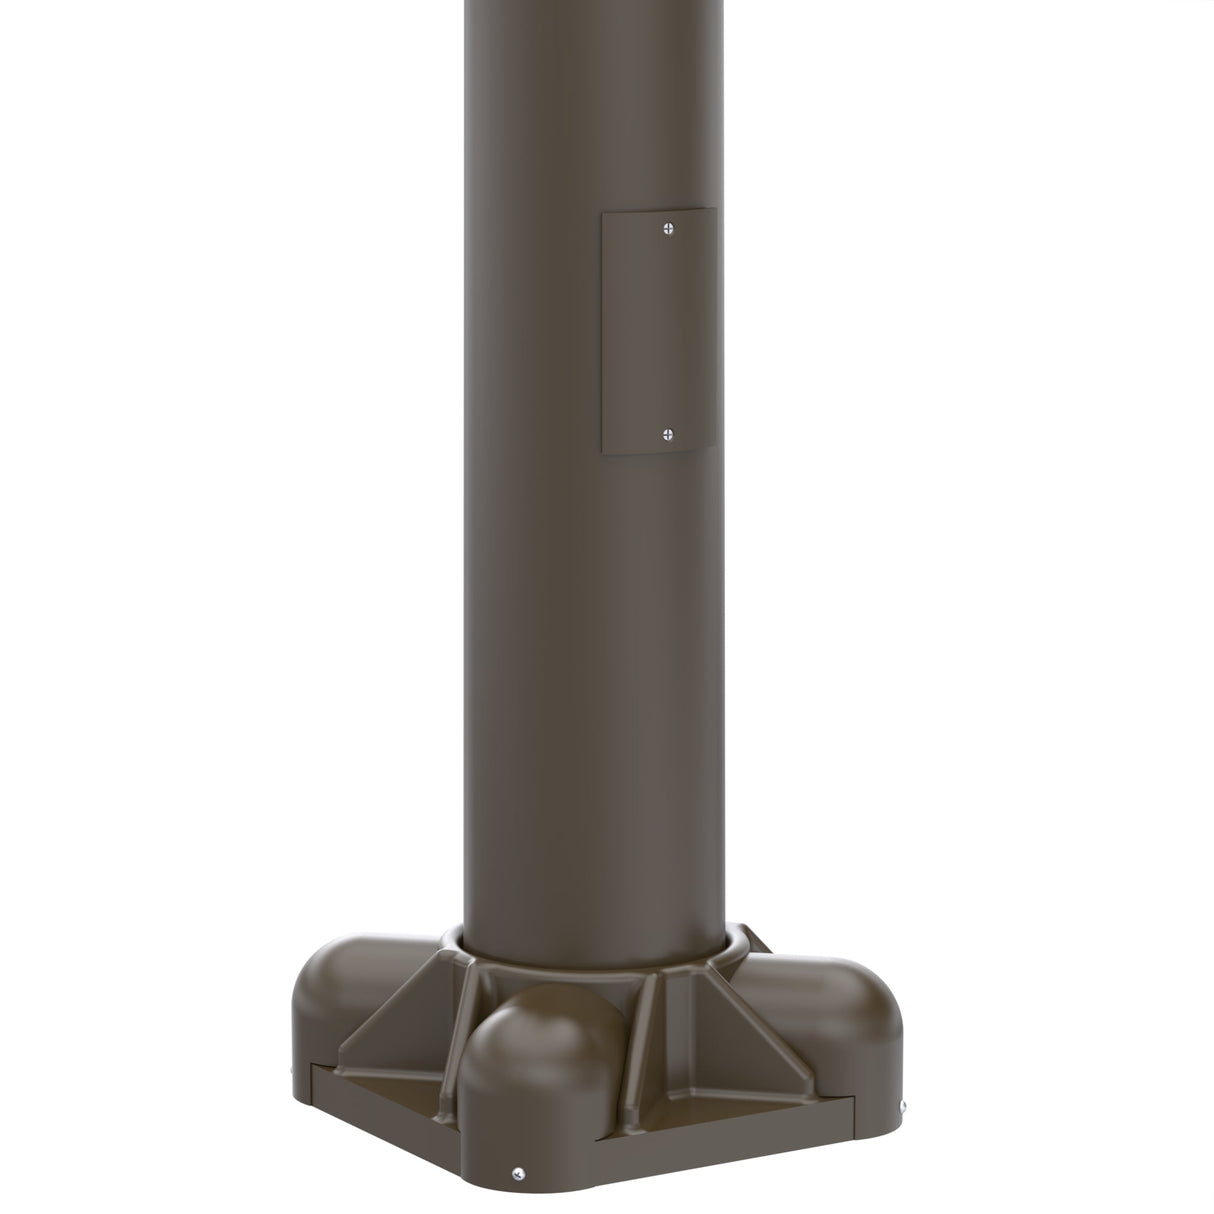 28' Tall x 8.0" Base OD x 4.5" Top OD x 0.156" Thick, Round Tapered Aluminum, Anchor Base Light Pole